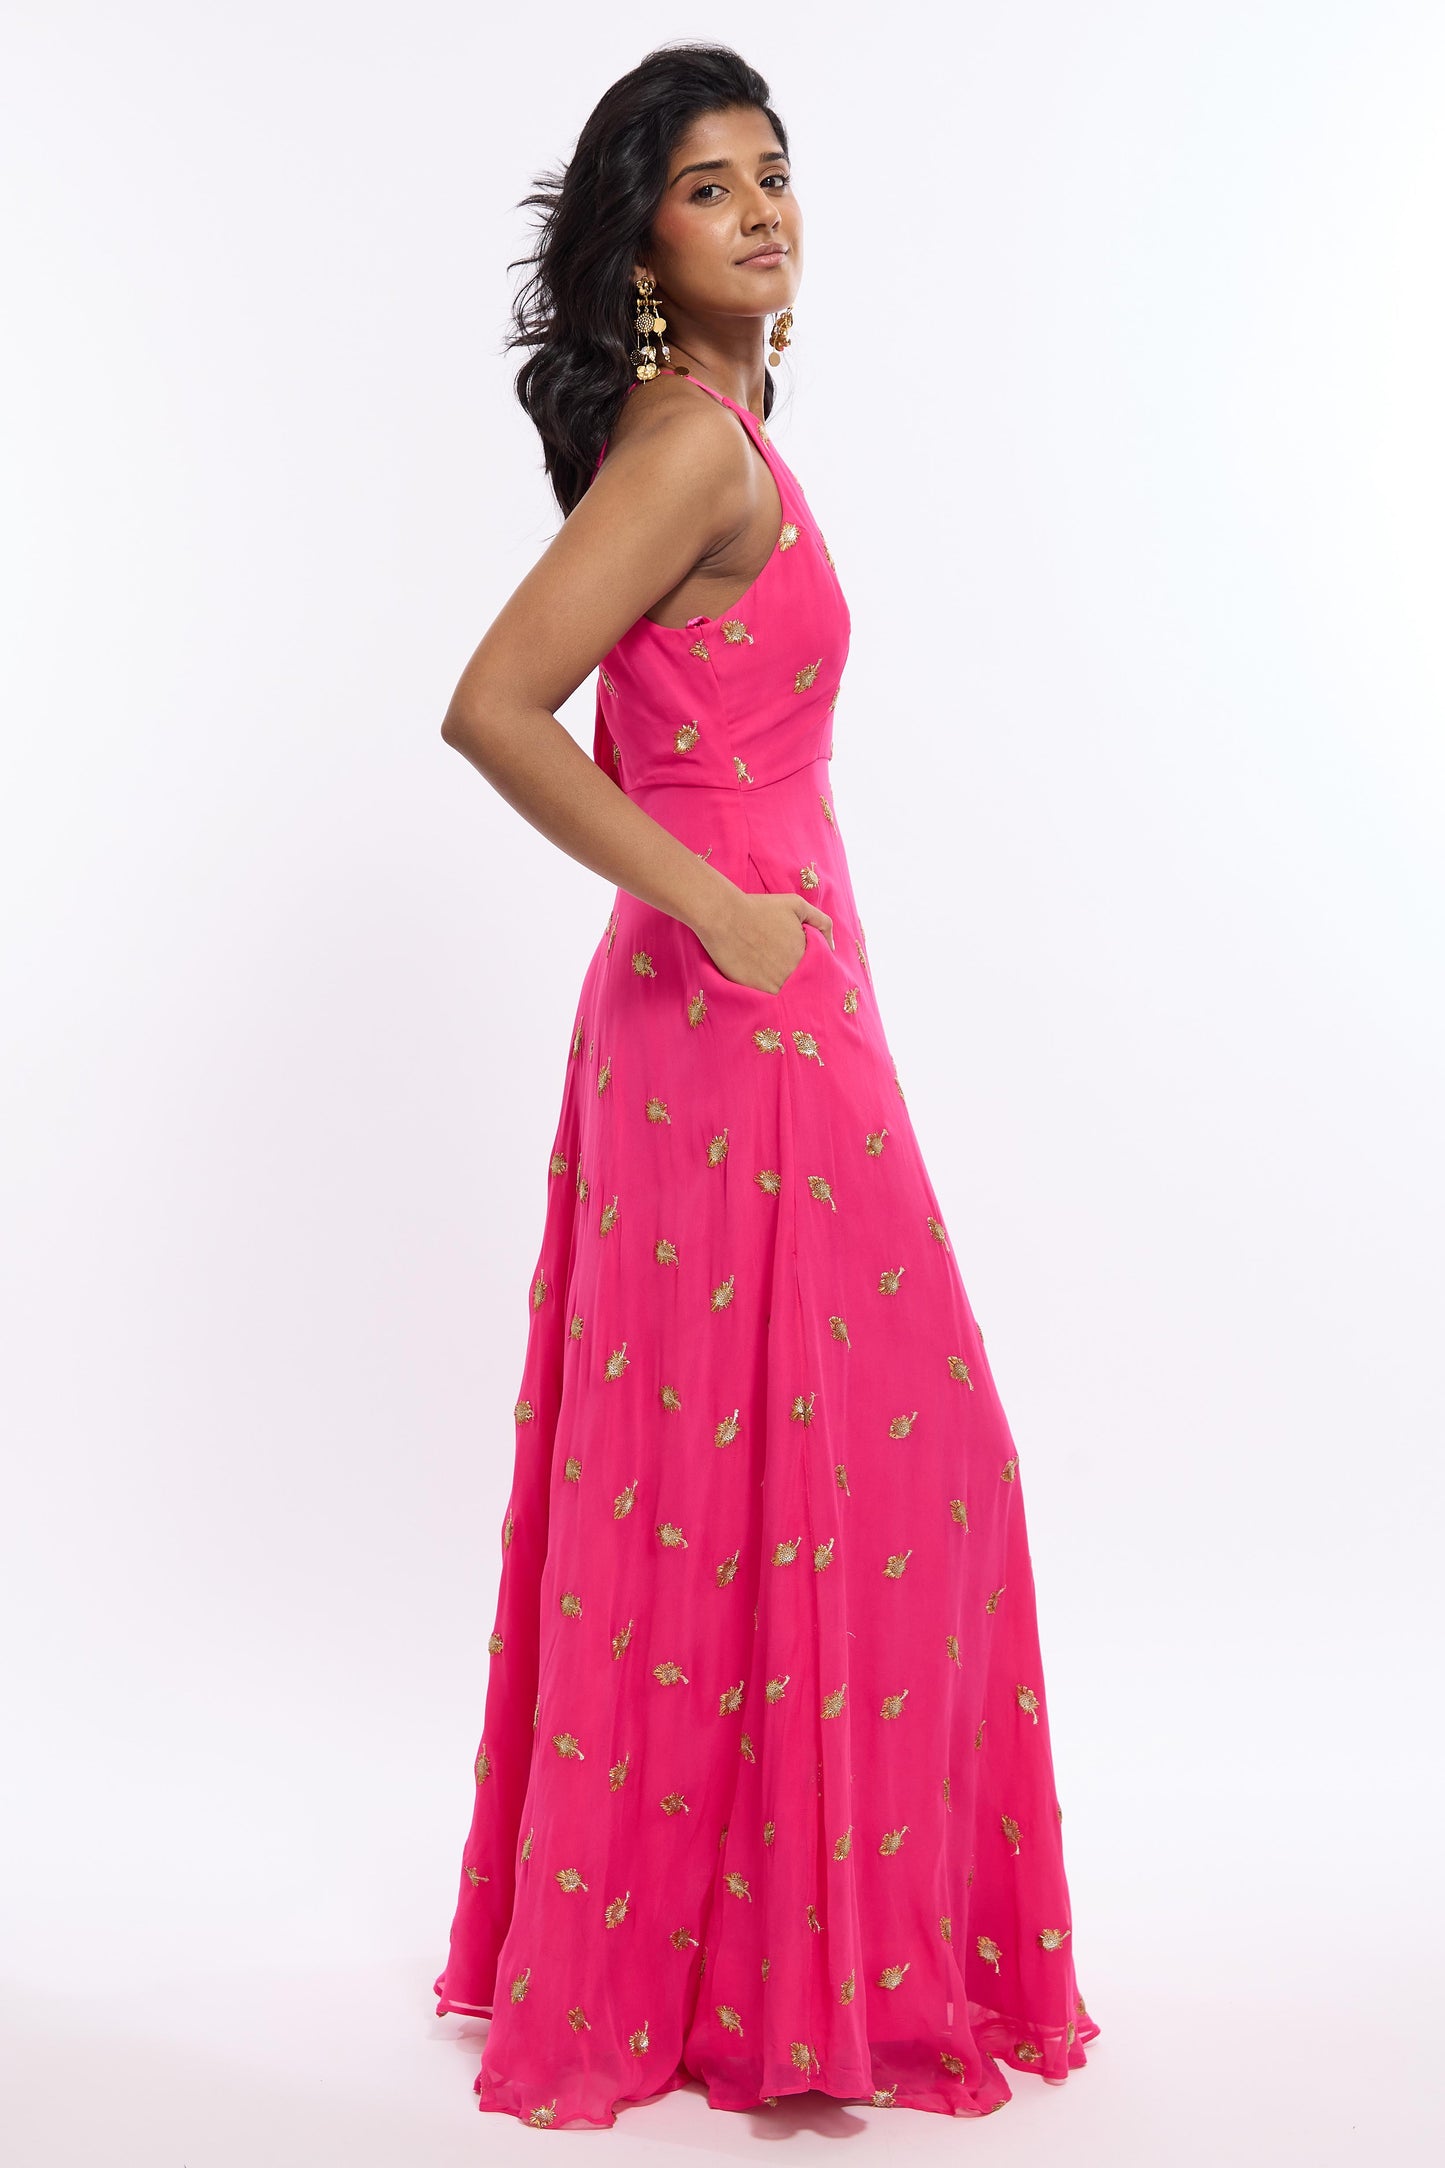 Nila Anarkali has a halter neck-cut, bodice, flowing waistline, and is paired with a contrasting silk crepe dupatta.